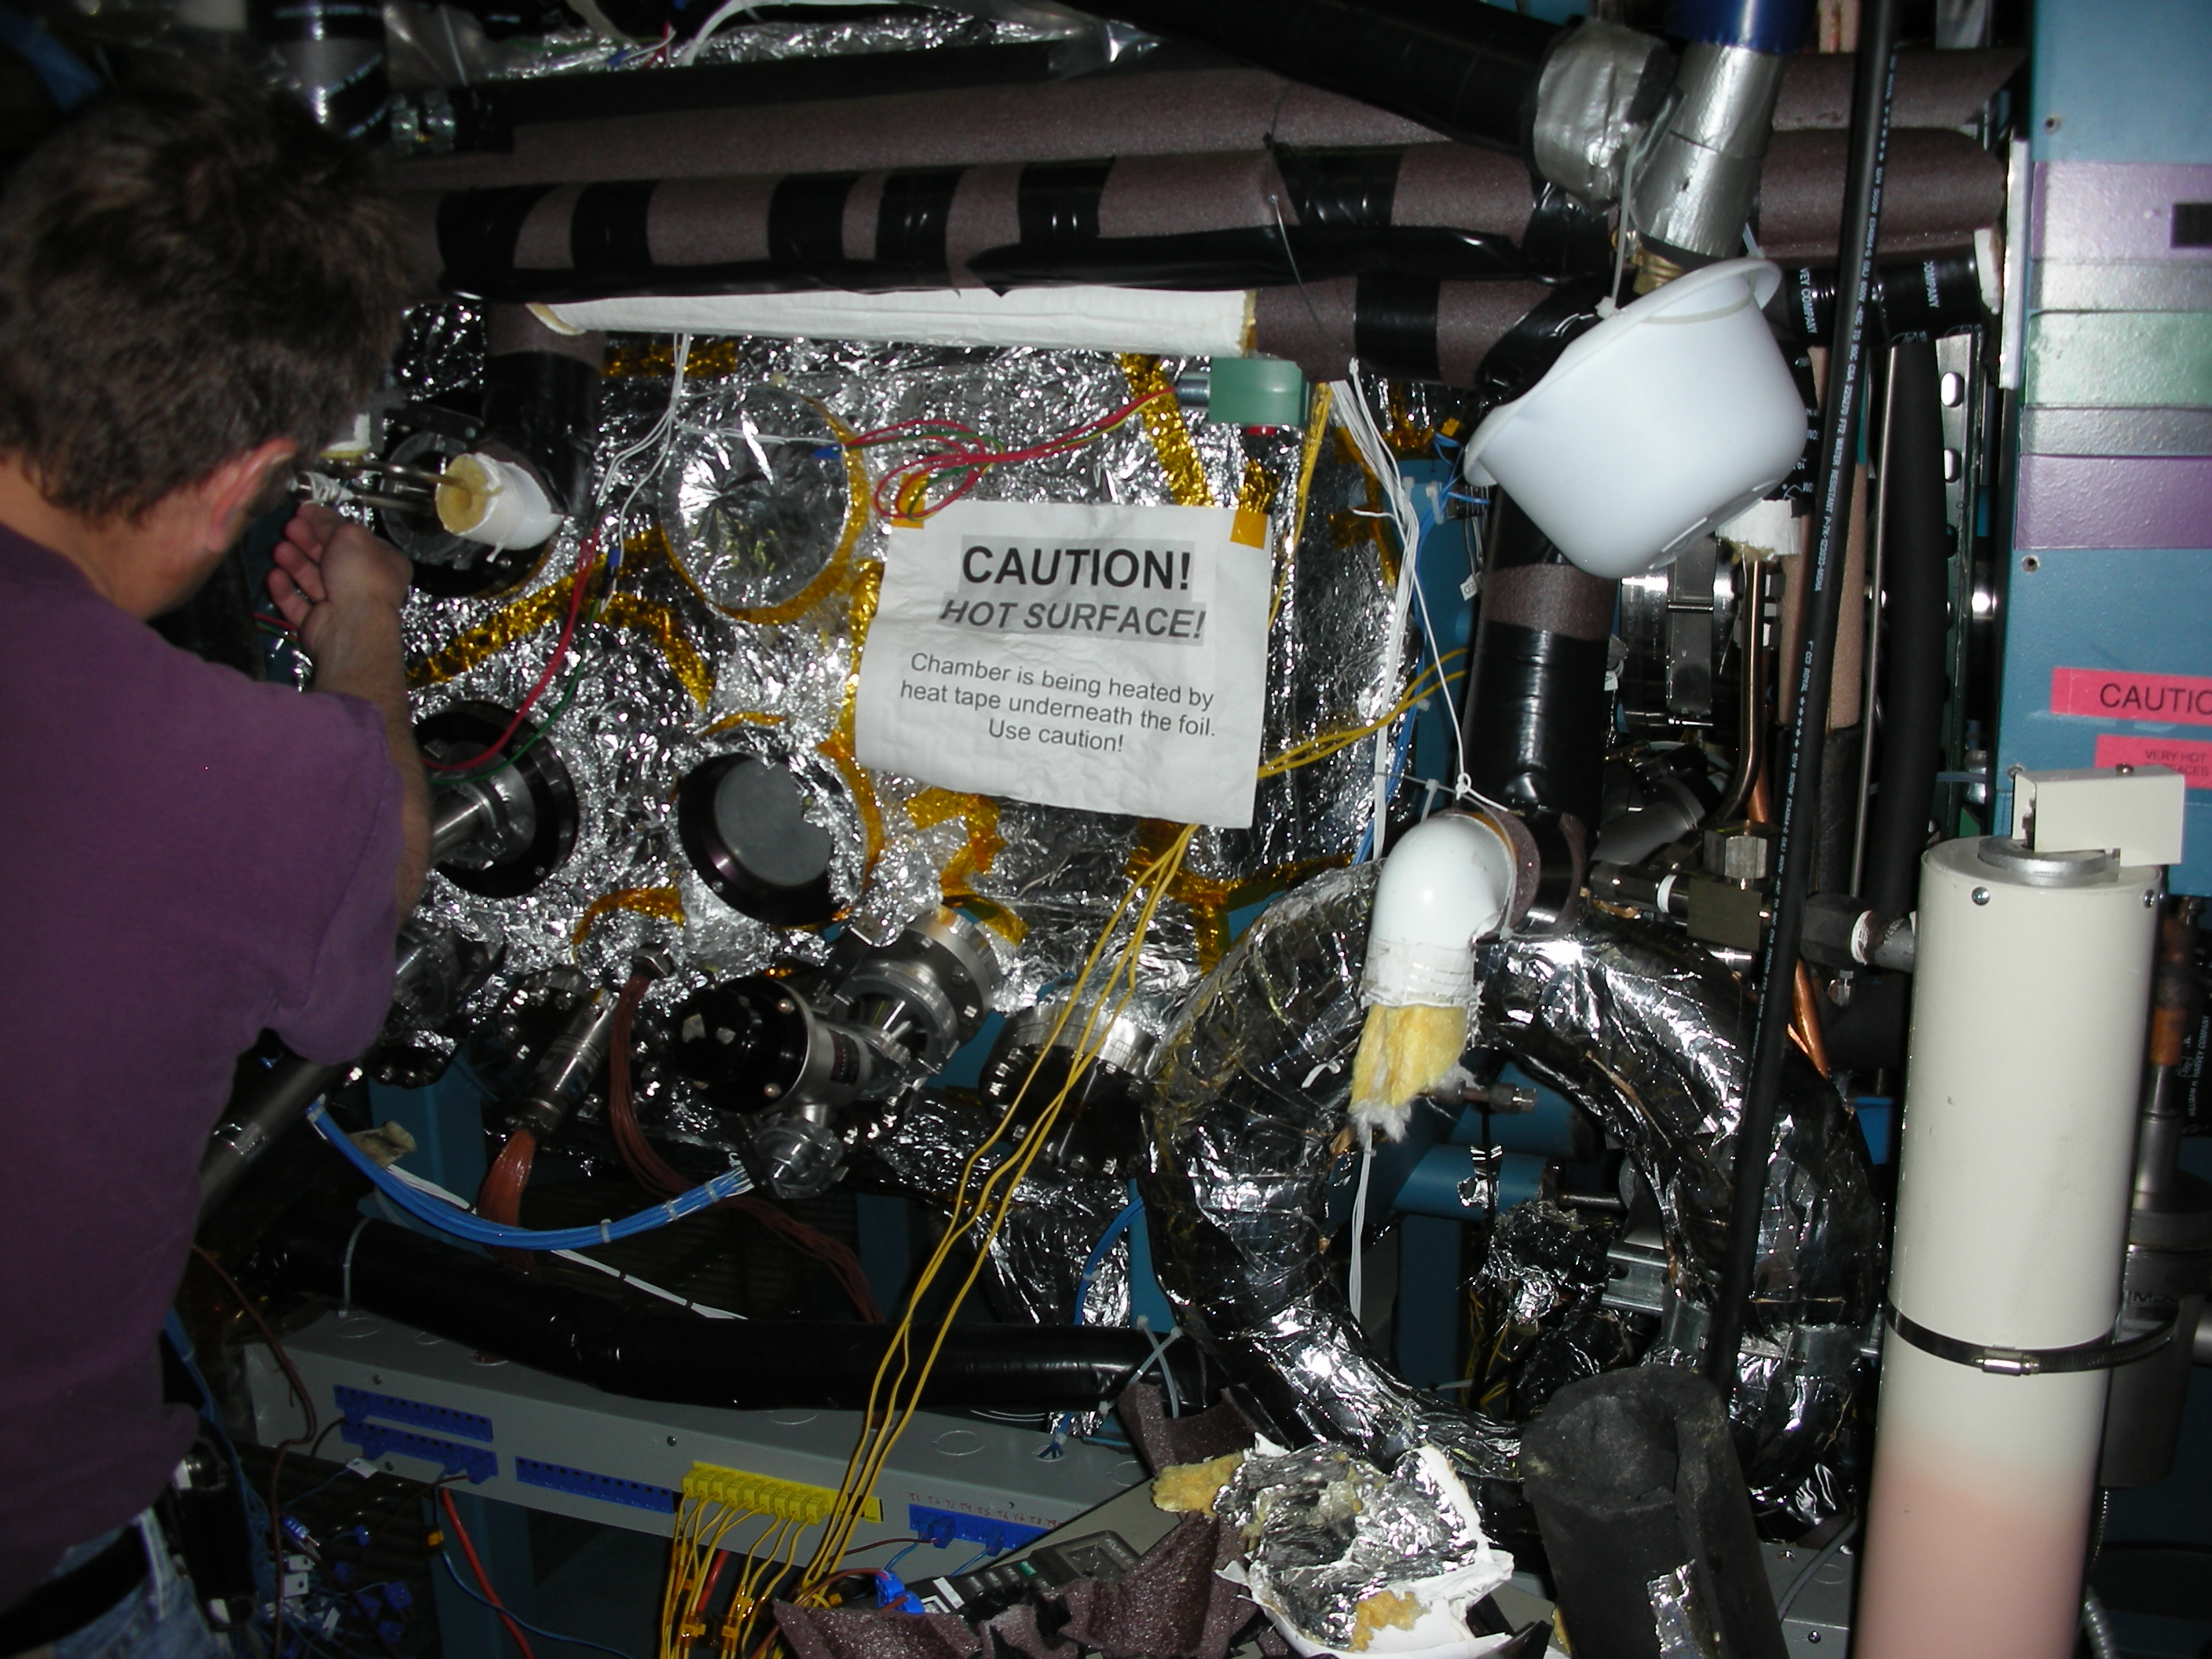 Image of the thermalvac chamber